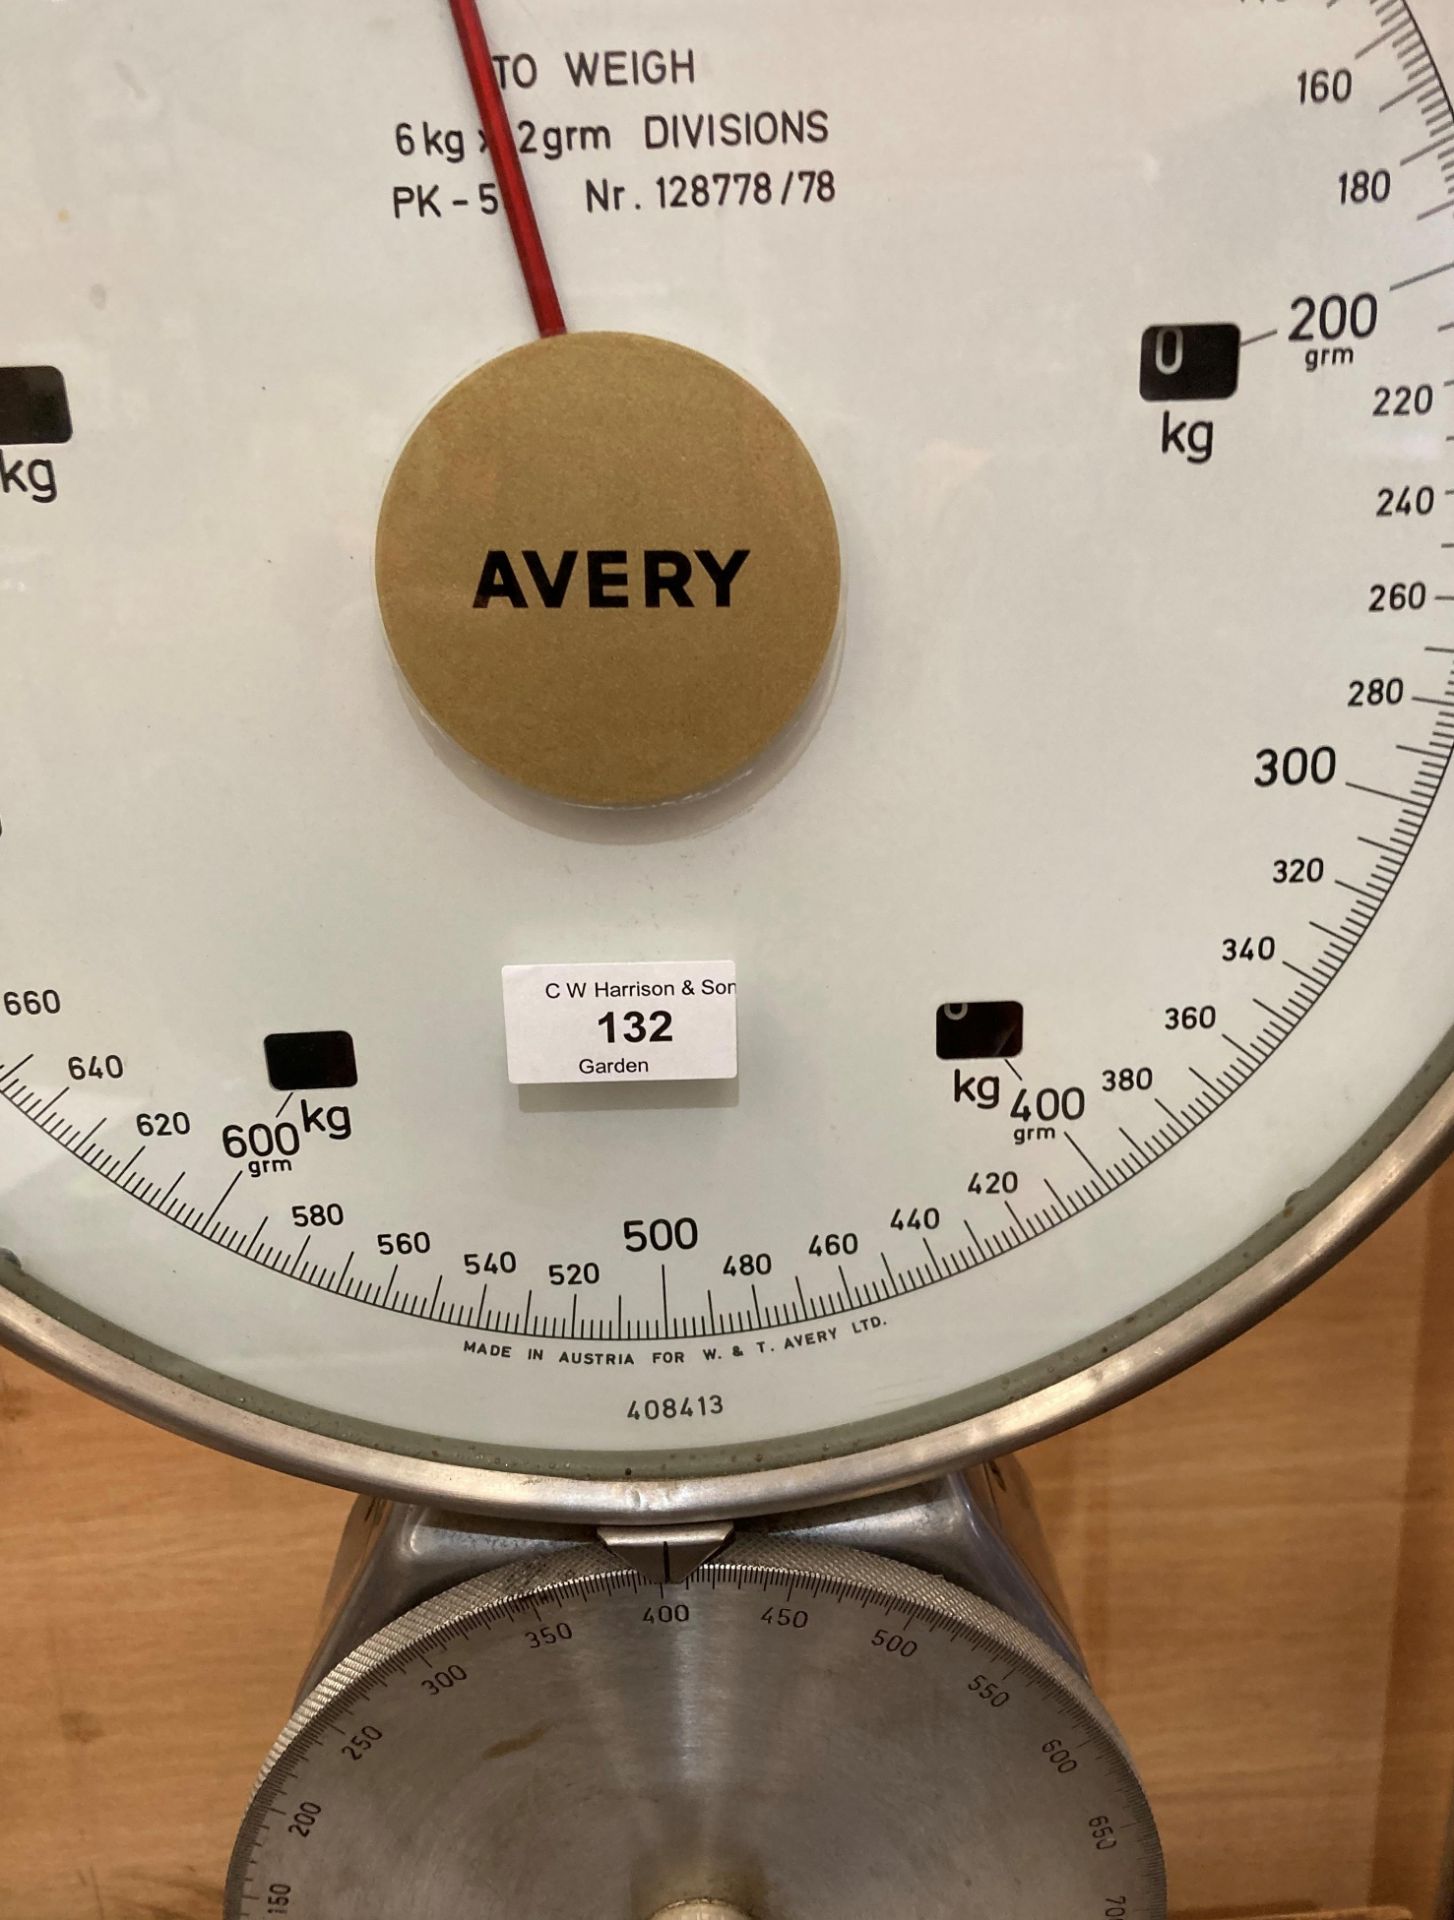 A set of Avery table mounting scales to weight 6kg x 2gm division reg PK-5U Nr. - Image 2 of 2